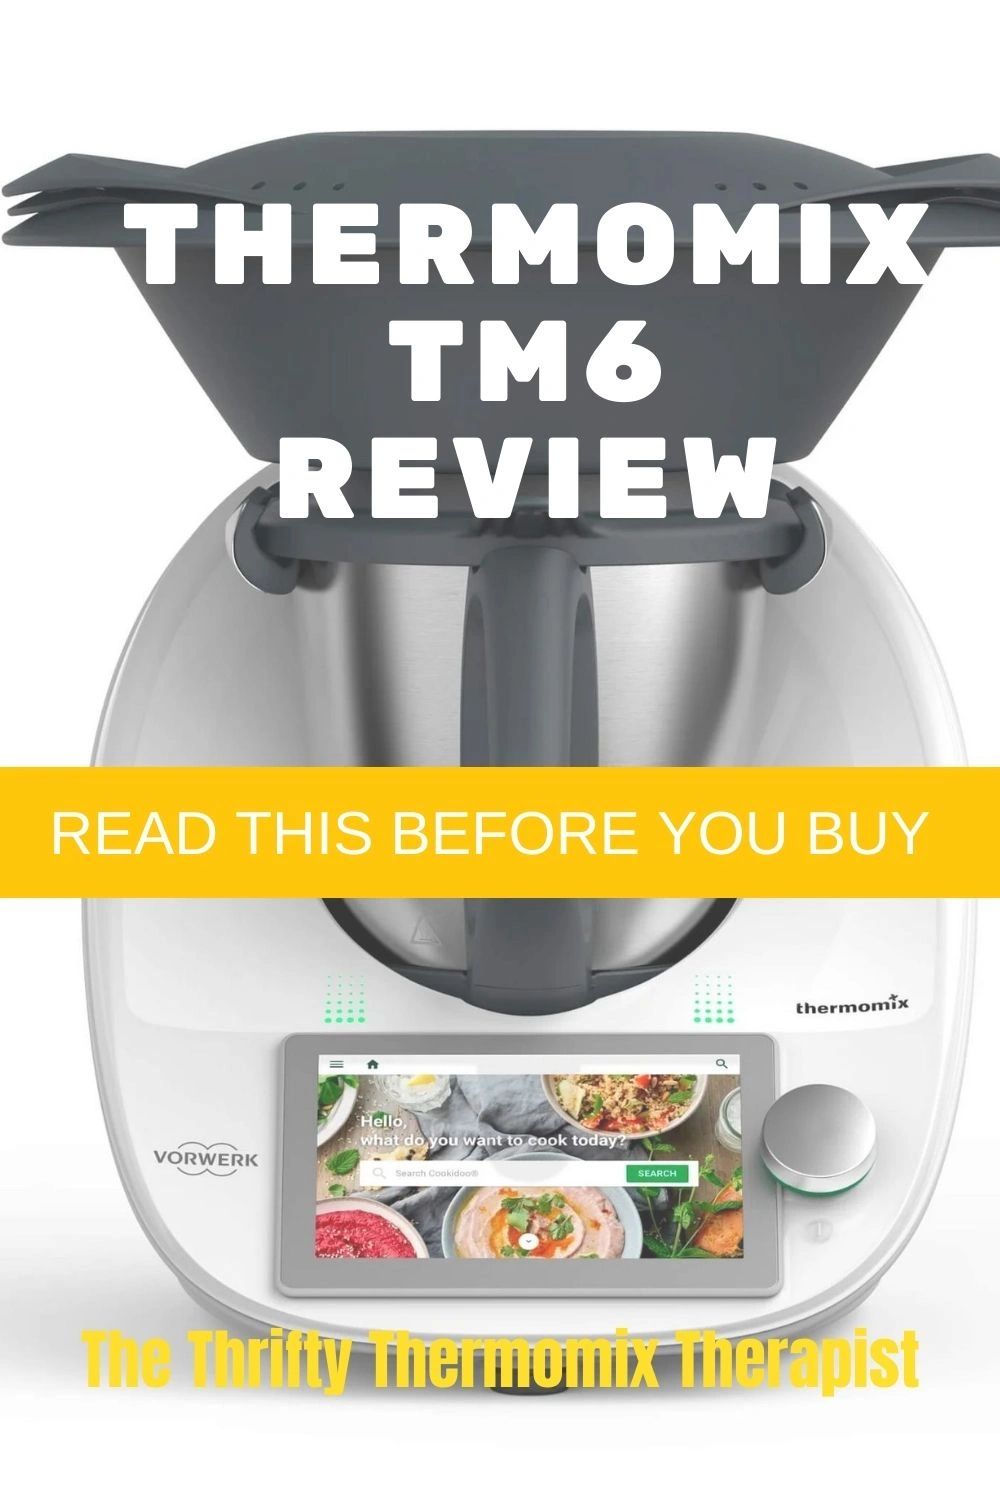 The GHI's Thermomix review: is this hyped multi-cooker worth £1000?